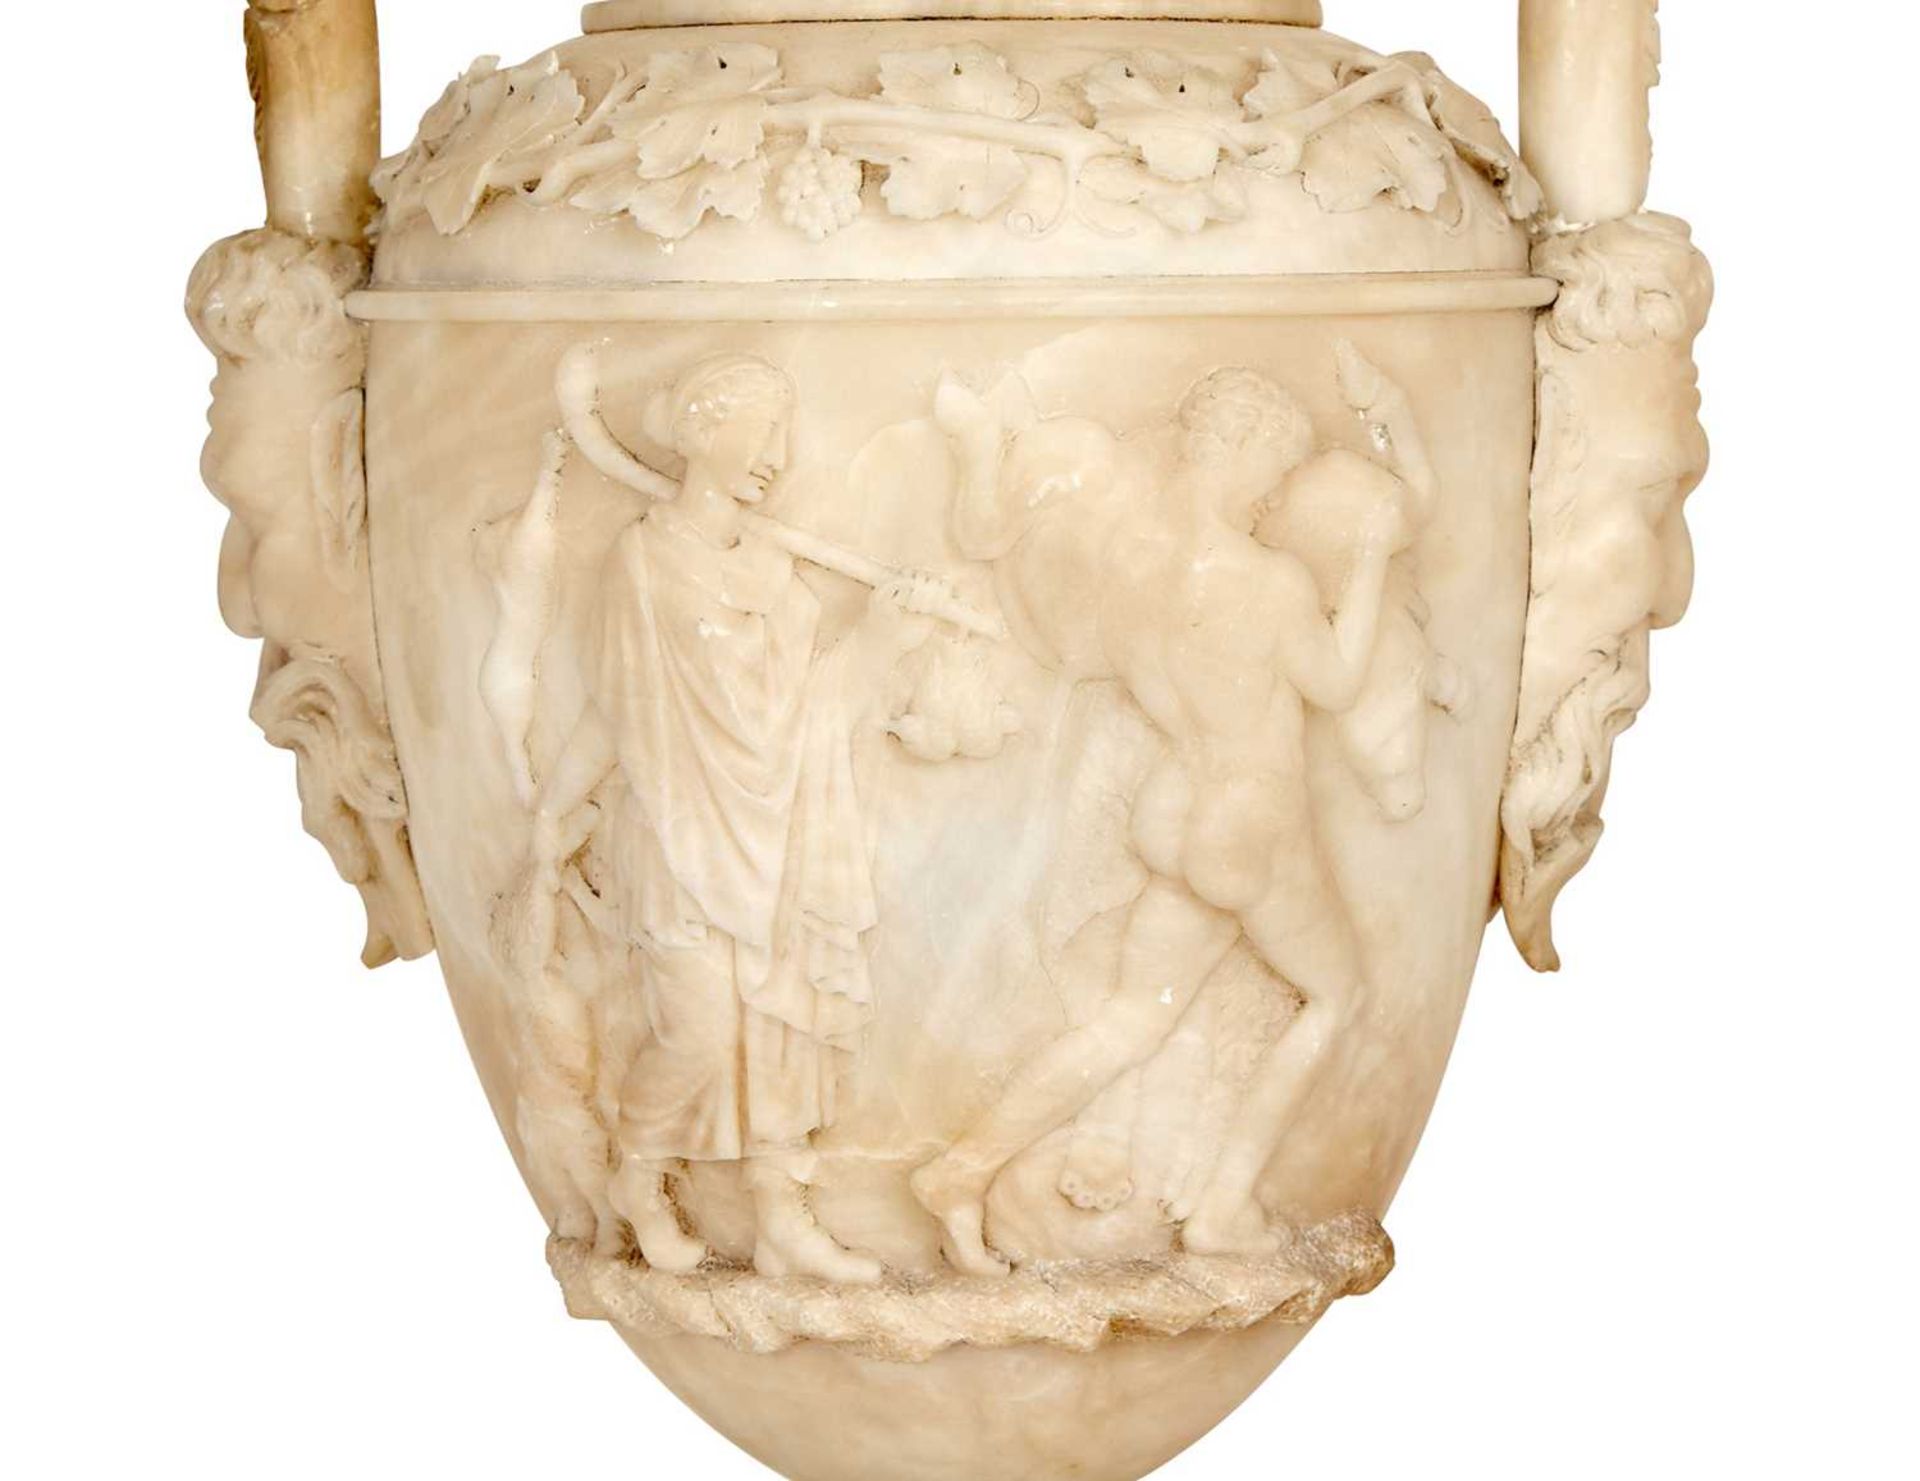 A LARGE PAIR OF 19TH CENTURY ITALIAN ALABASTER URNS AND COVERS IN THE STYLE OF PIRANESI - Image 5 of 12